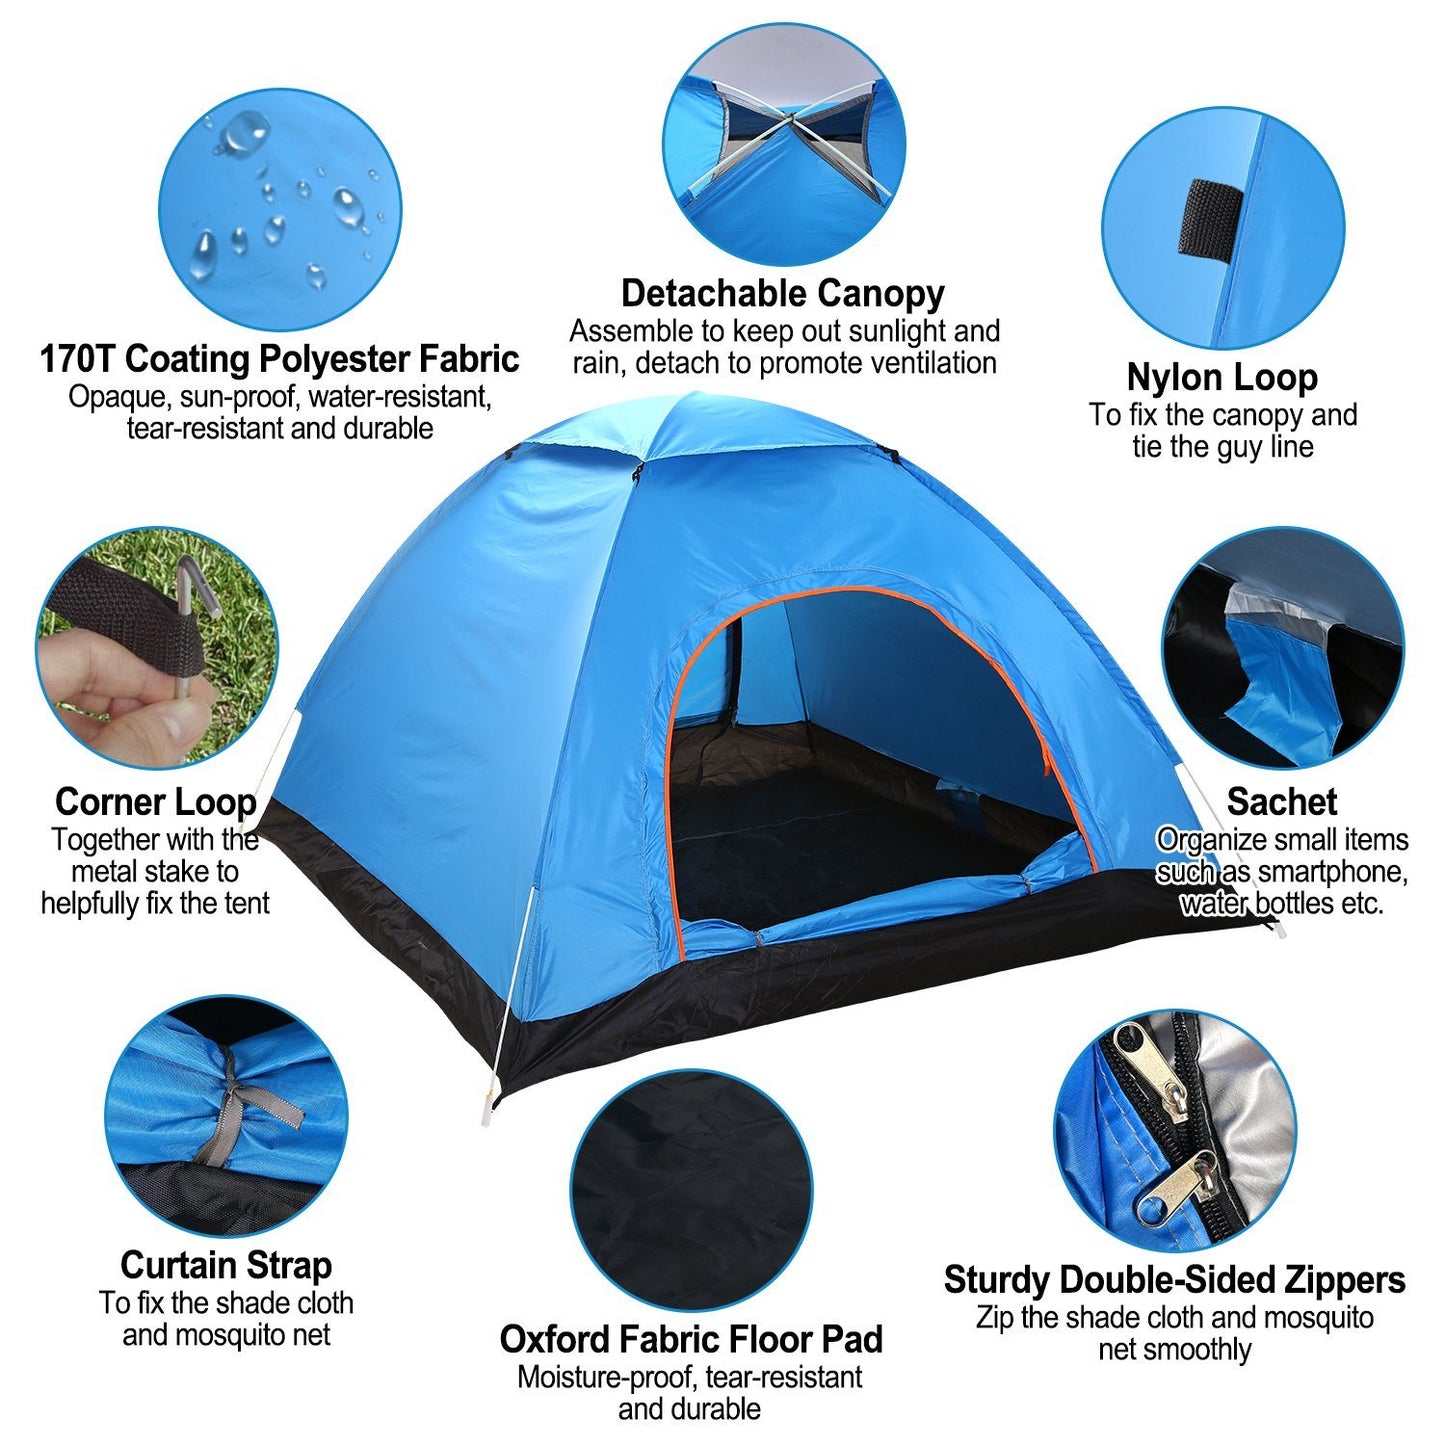 4 Persons Camping Waterproof Tent Pop Up Tent Instant Setup Tent w/2 Mosquito Net Doors Carrying Bag Folding 4 Seasons